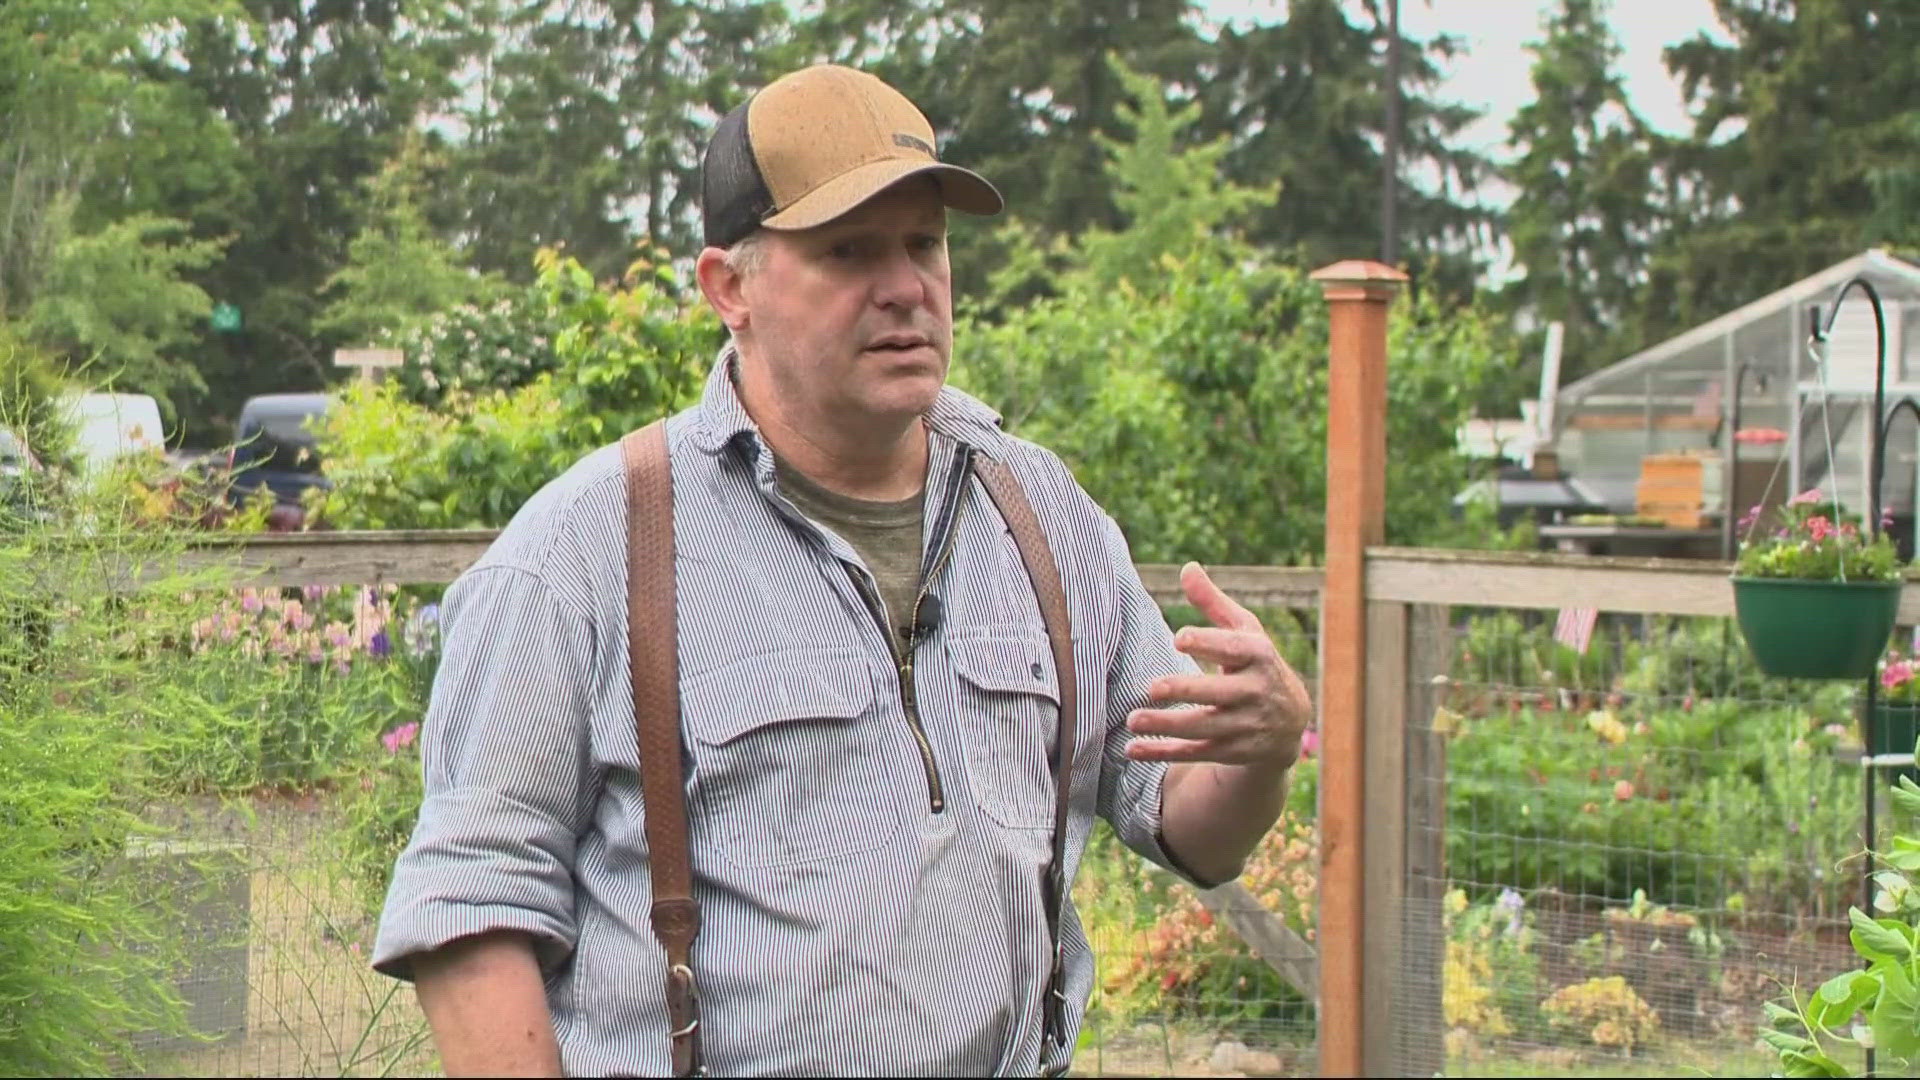 Vancouver Veteran Affairs Medical Center begins gardening club for veterans struggling with physical and mental health issues.